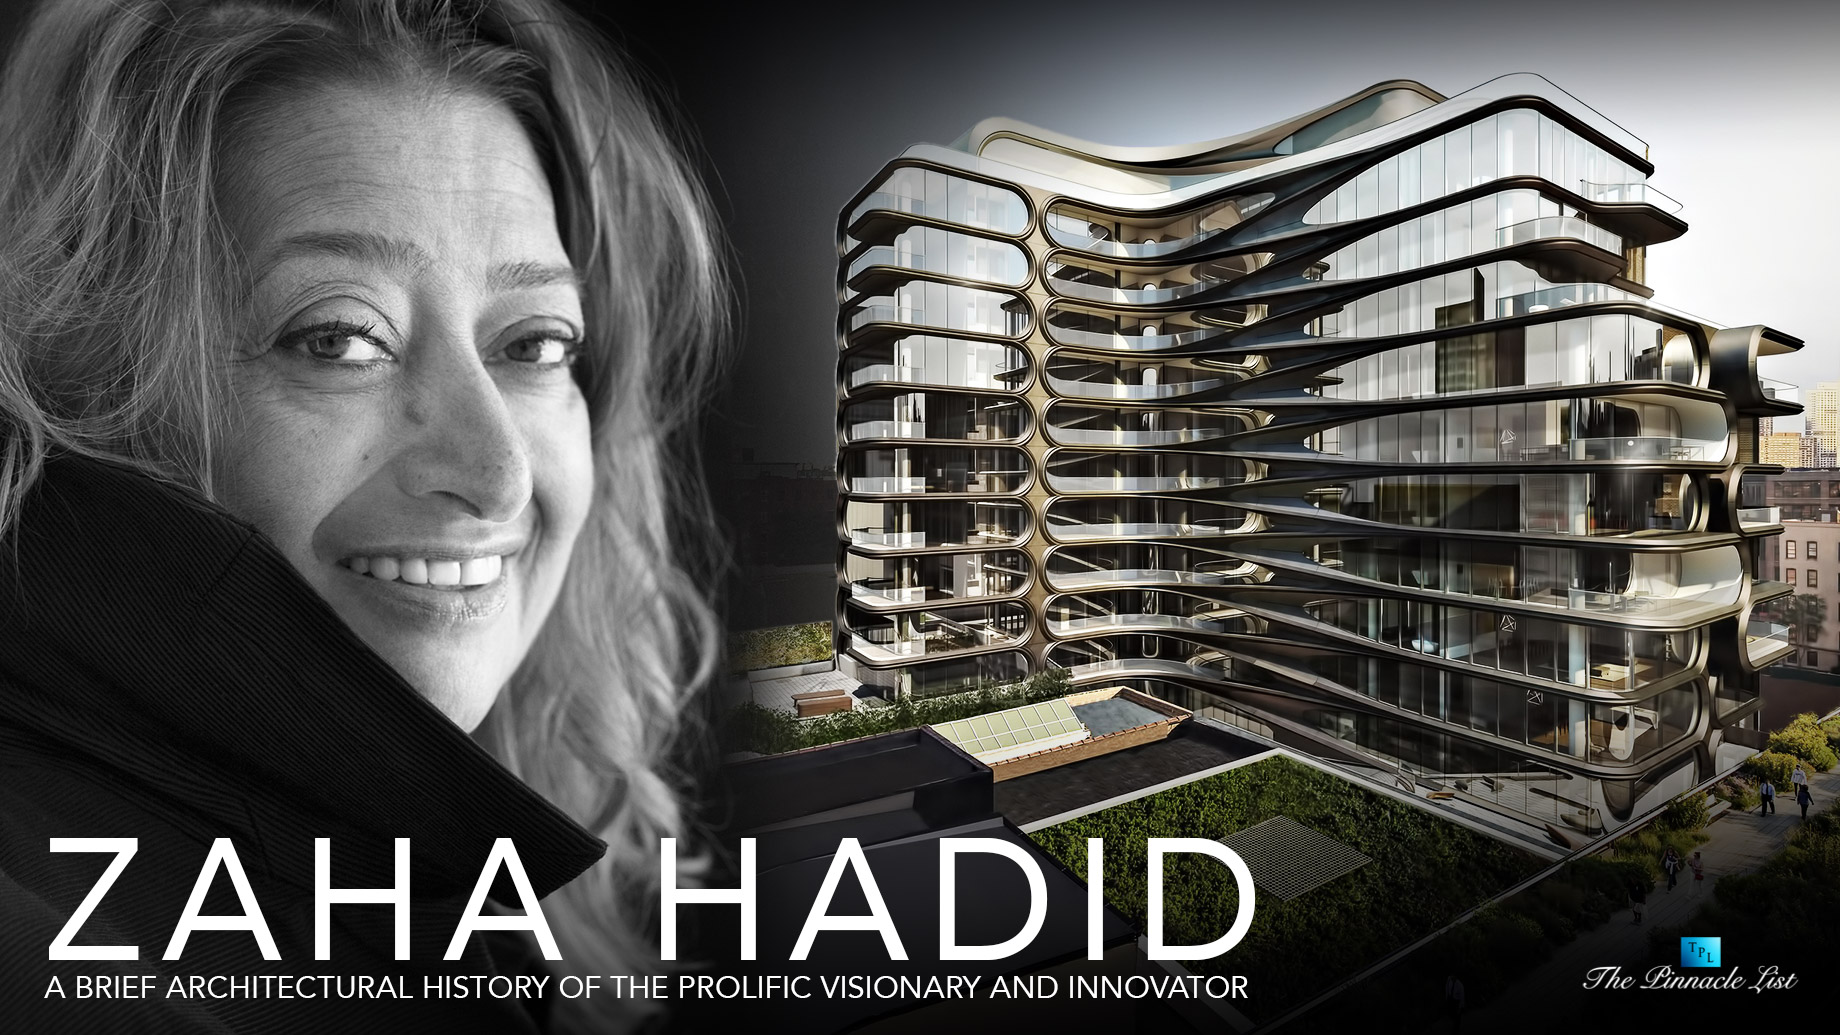 Zaha Hadid - A Brief Architectural History of the Prolific Visionary and Innovator